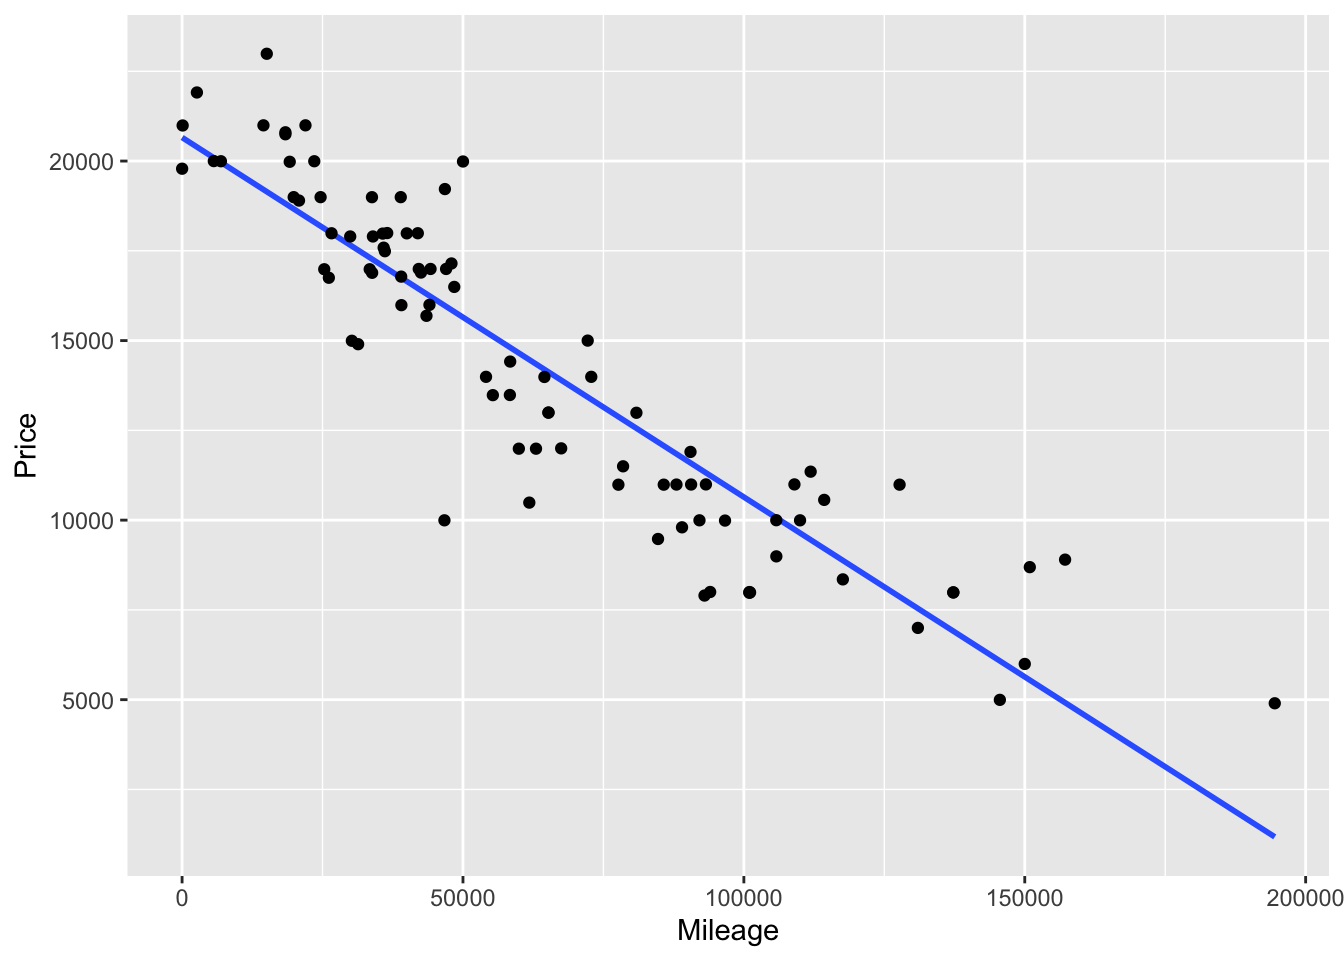 The price of used cars falls with increasing miles driven.  The gray diagonal line shows the best fitting linear model.  Price falls by about $10,000 for 100,000 miles, or 10 cents per mile driven.